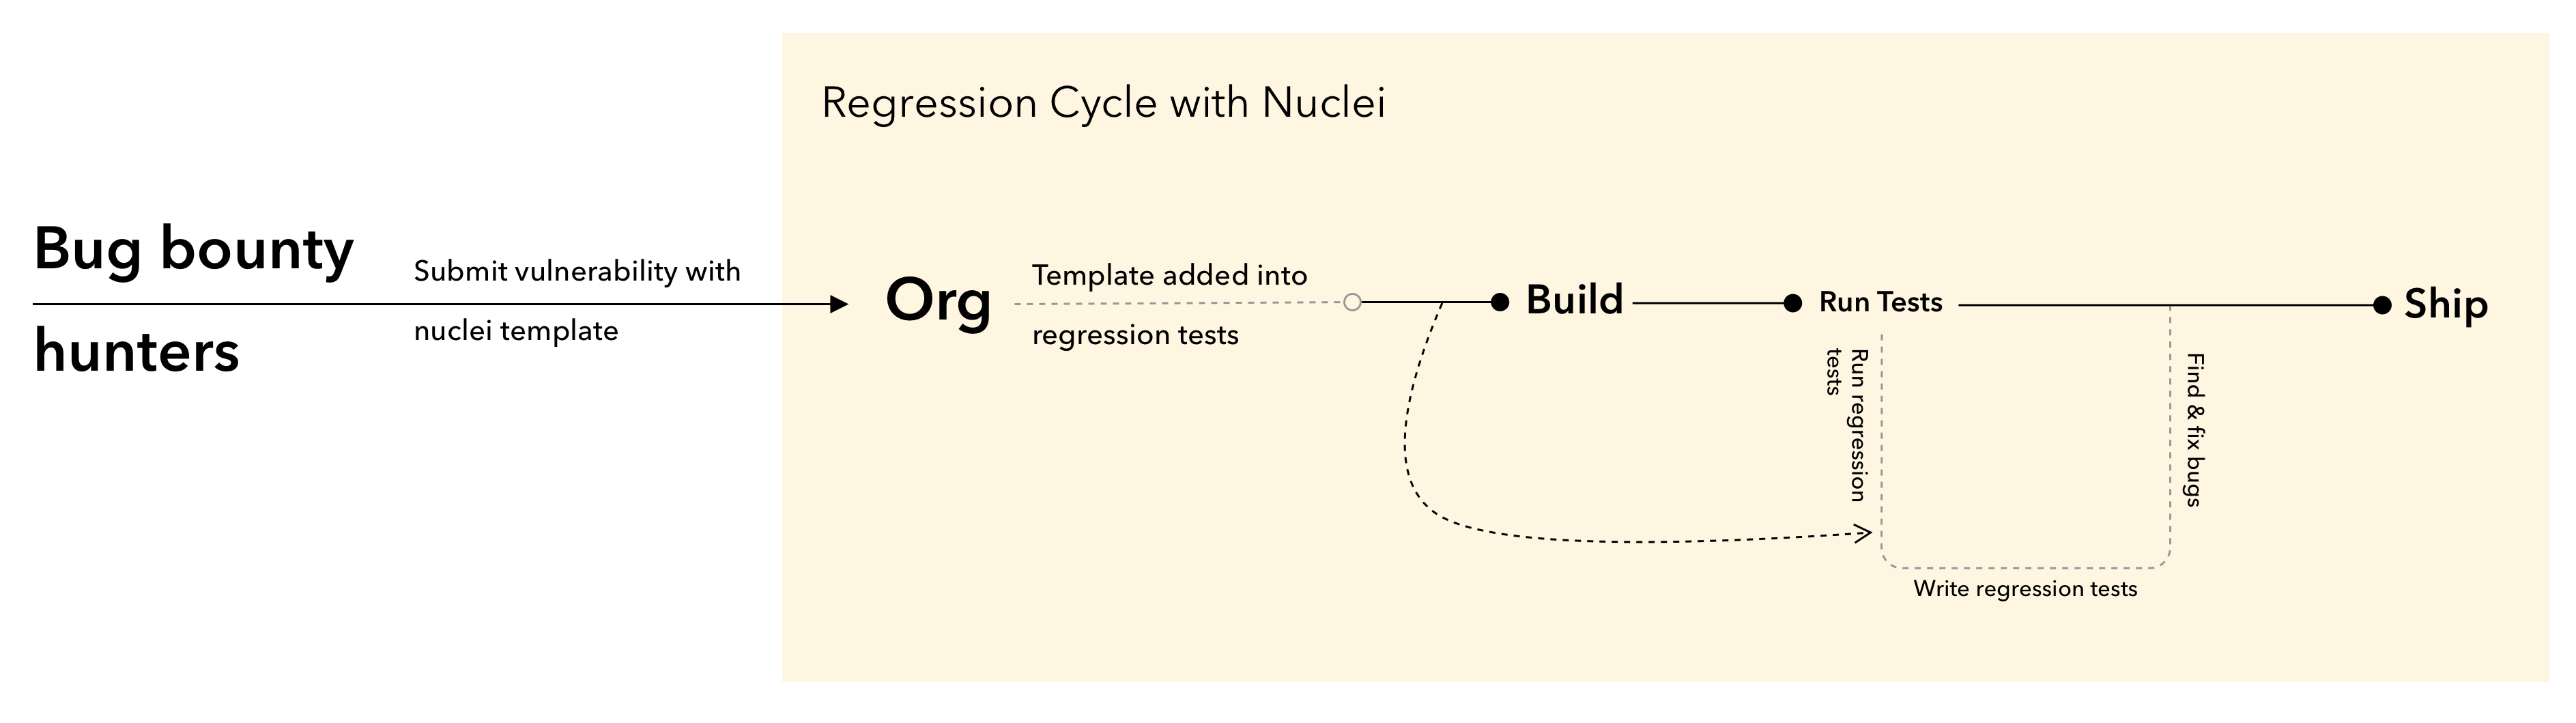 regression-cycle-with-nuclei